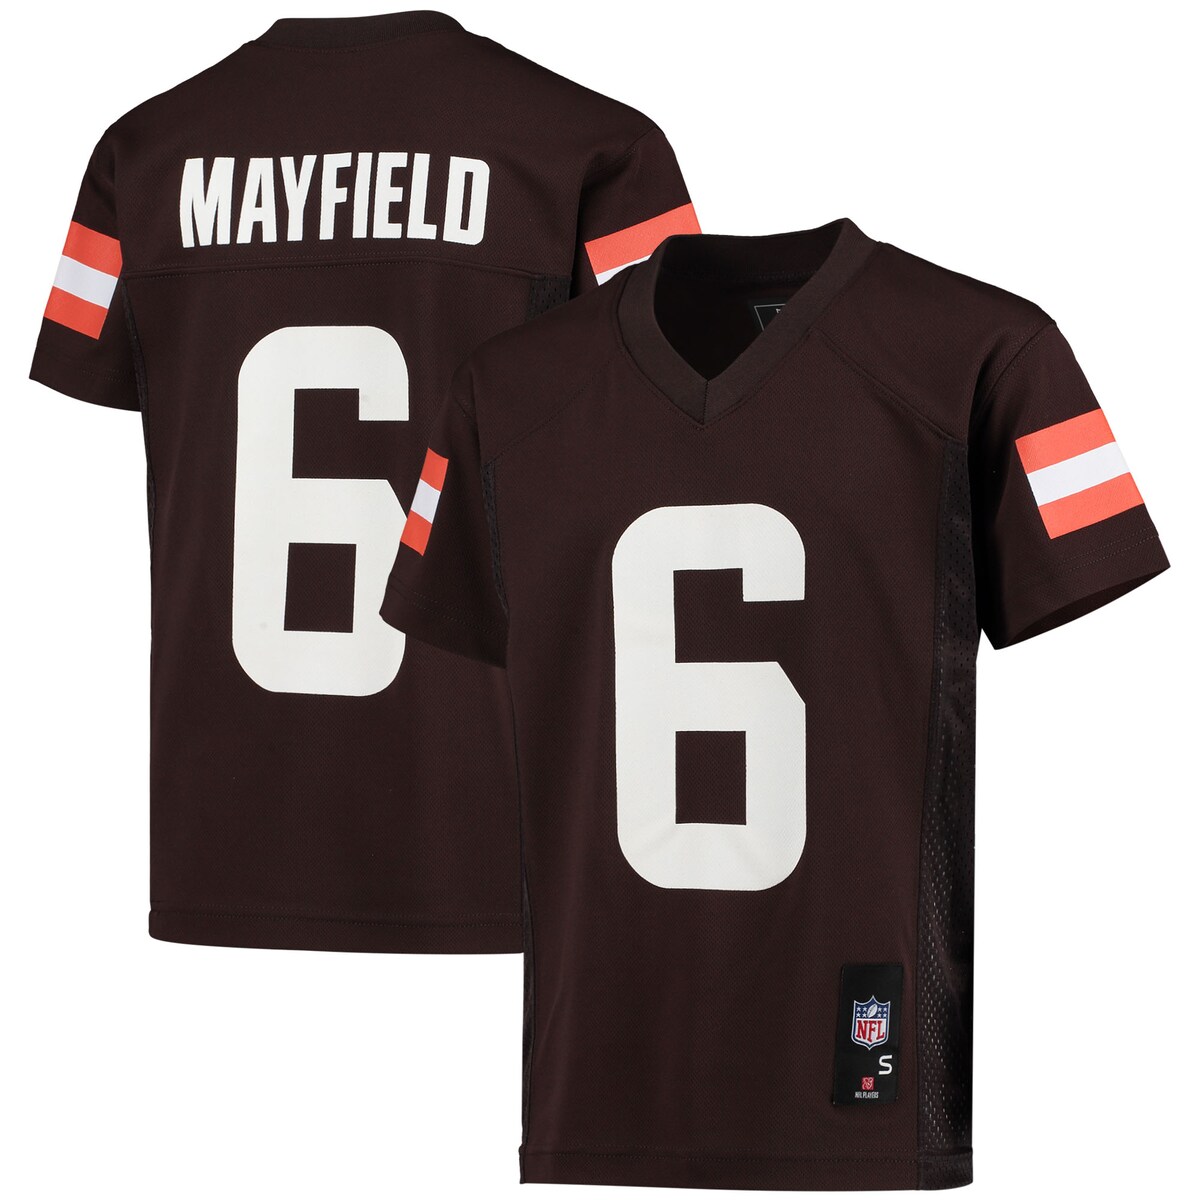 Elevate showing off support for Baker Mayfield with this Cleveland Browns Replica Player jersey. It features printed Cleveland Browns graphics and looks similar to the same one Baker Mayfield sports on the field. In addition, the mesh side panels will help provide a breezy feel for more comfortable wearing.Material: 100% PolyesterShort sleevesOfficially licensedReplica JerseyScreen print graphicsMachine wash with garment inside out, tumble dry lowBrand: OuterstuffImportedV-neckWoven jock tag at hemMesh fabric side panels